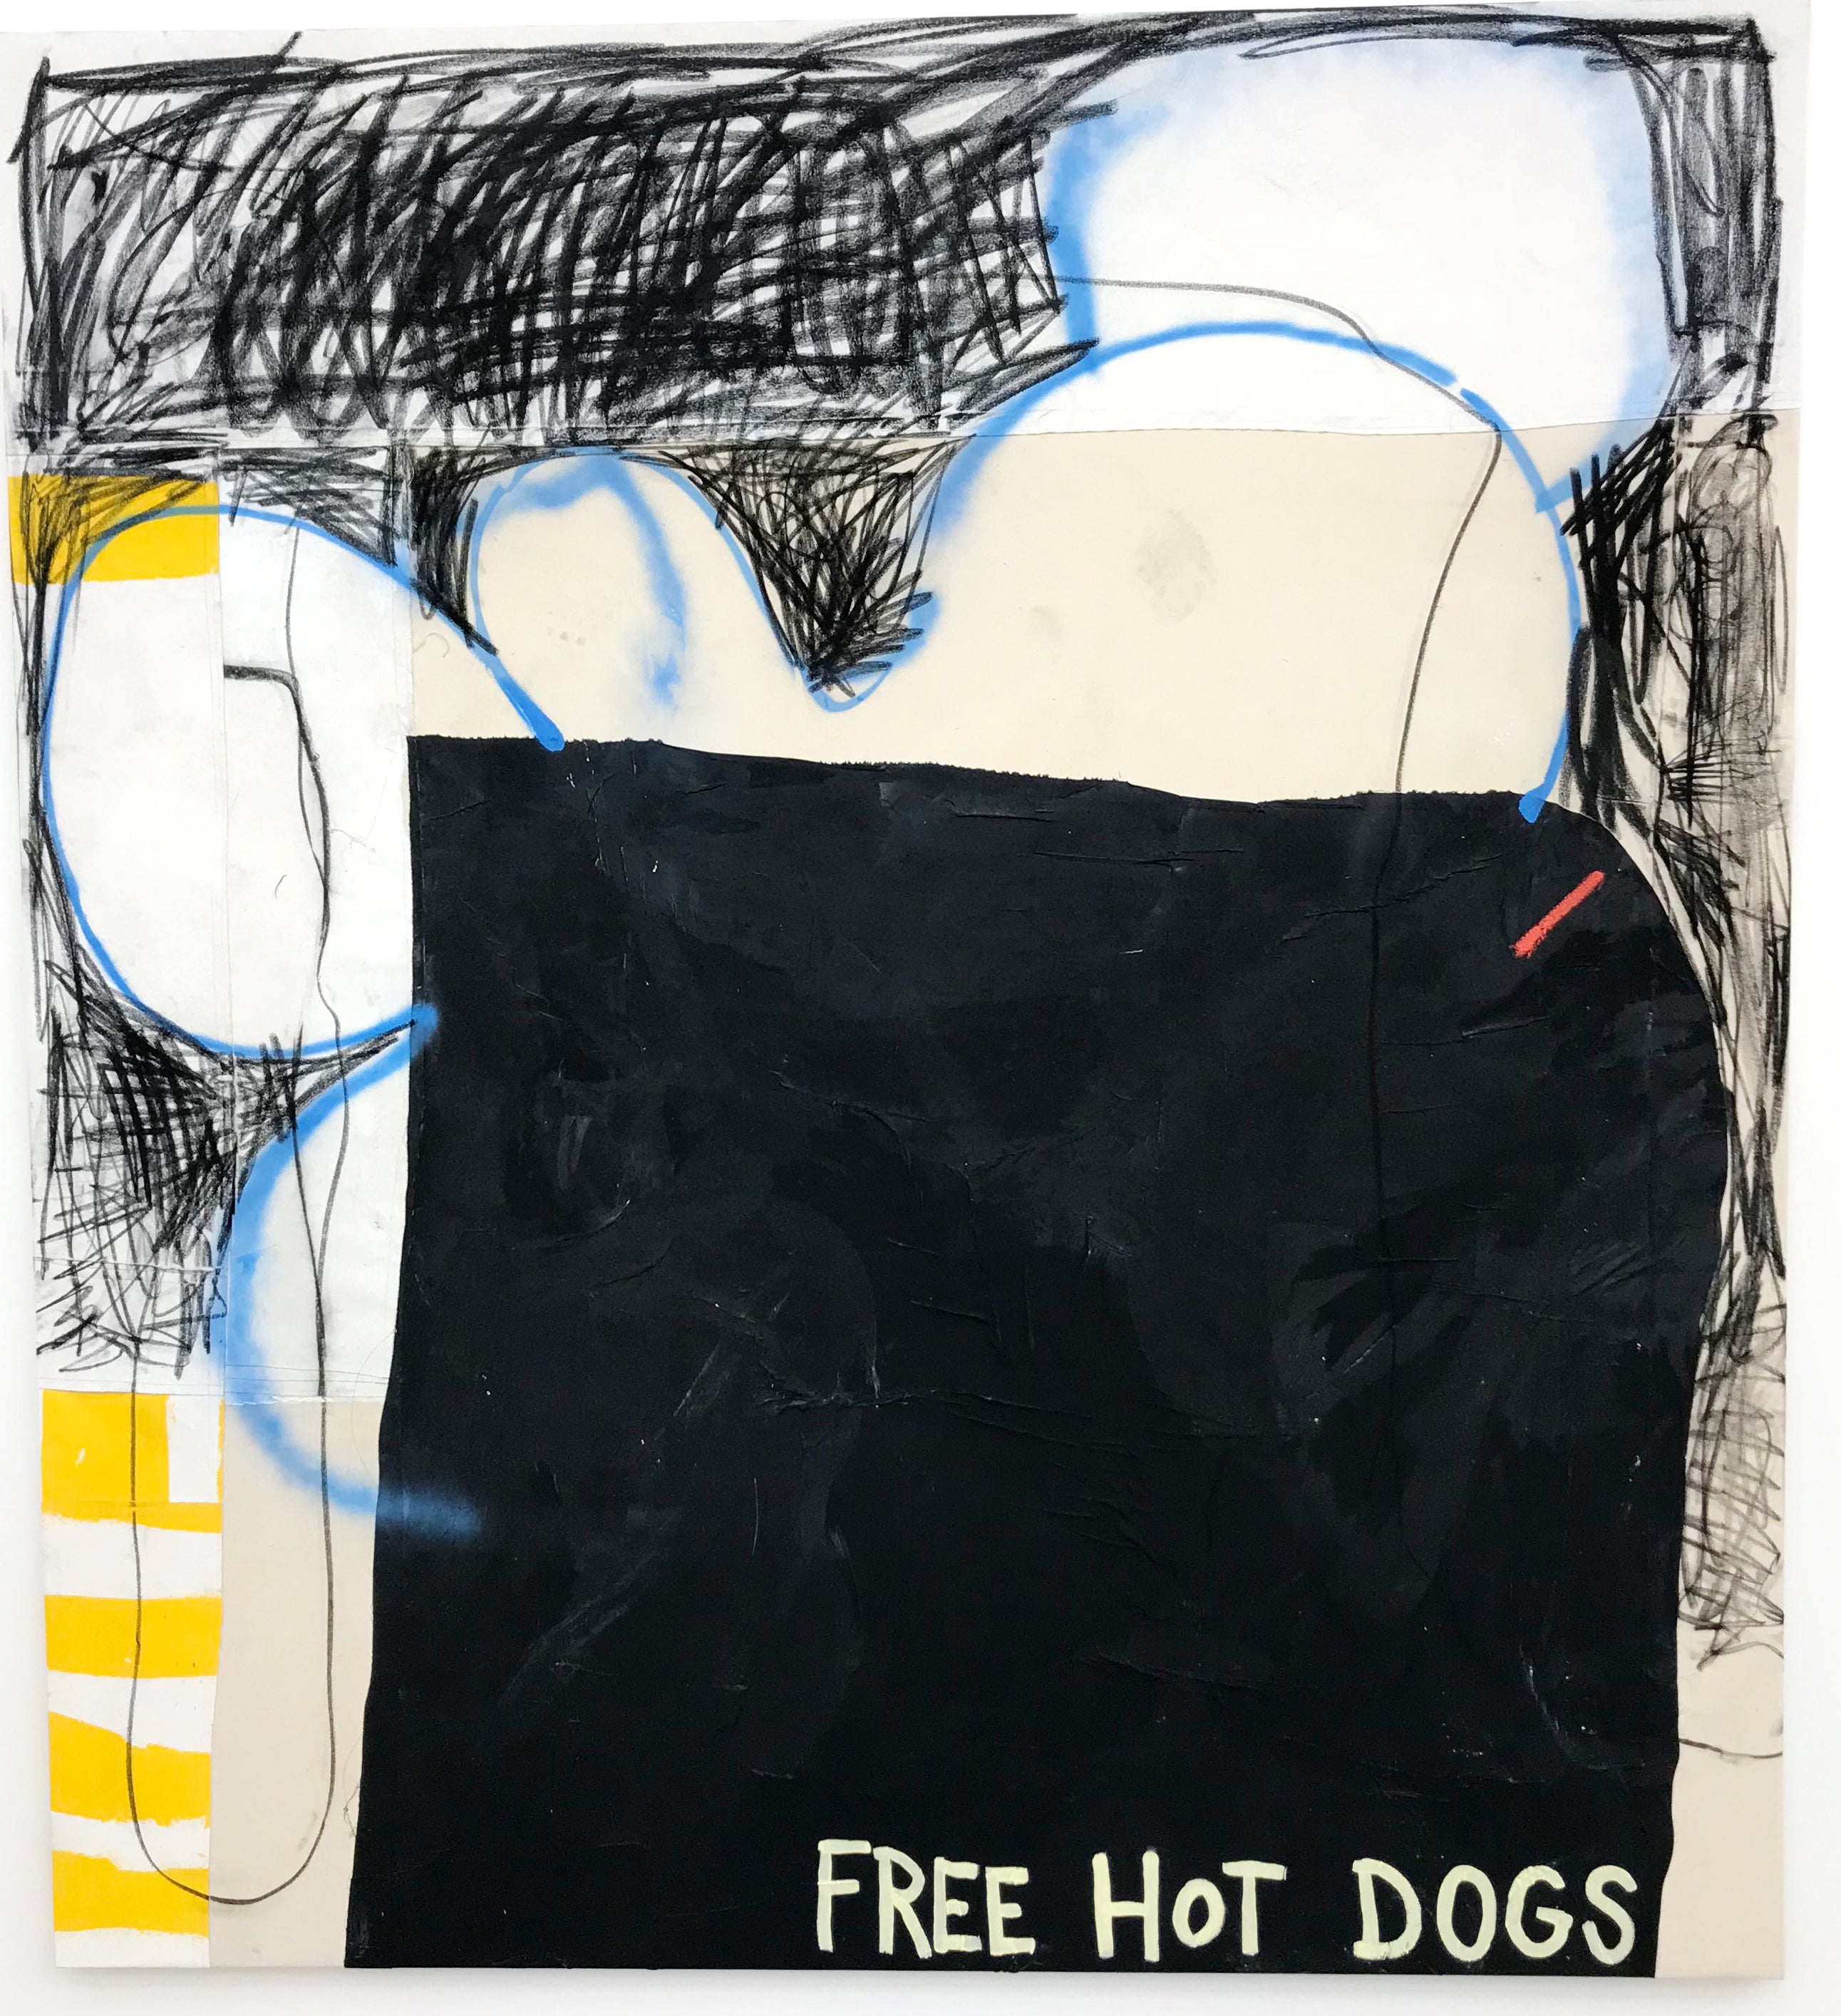 Free Hot Dogs, 2018. Taylor White